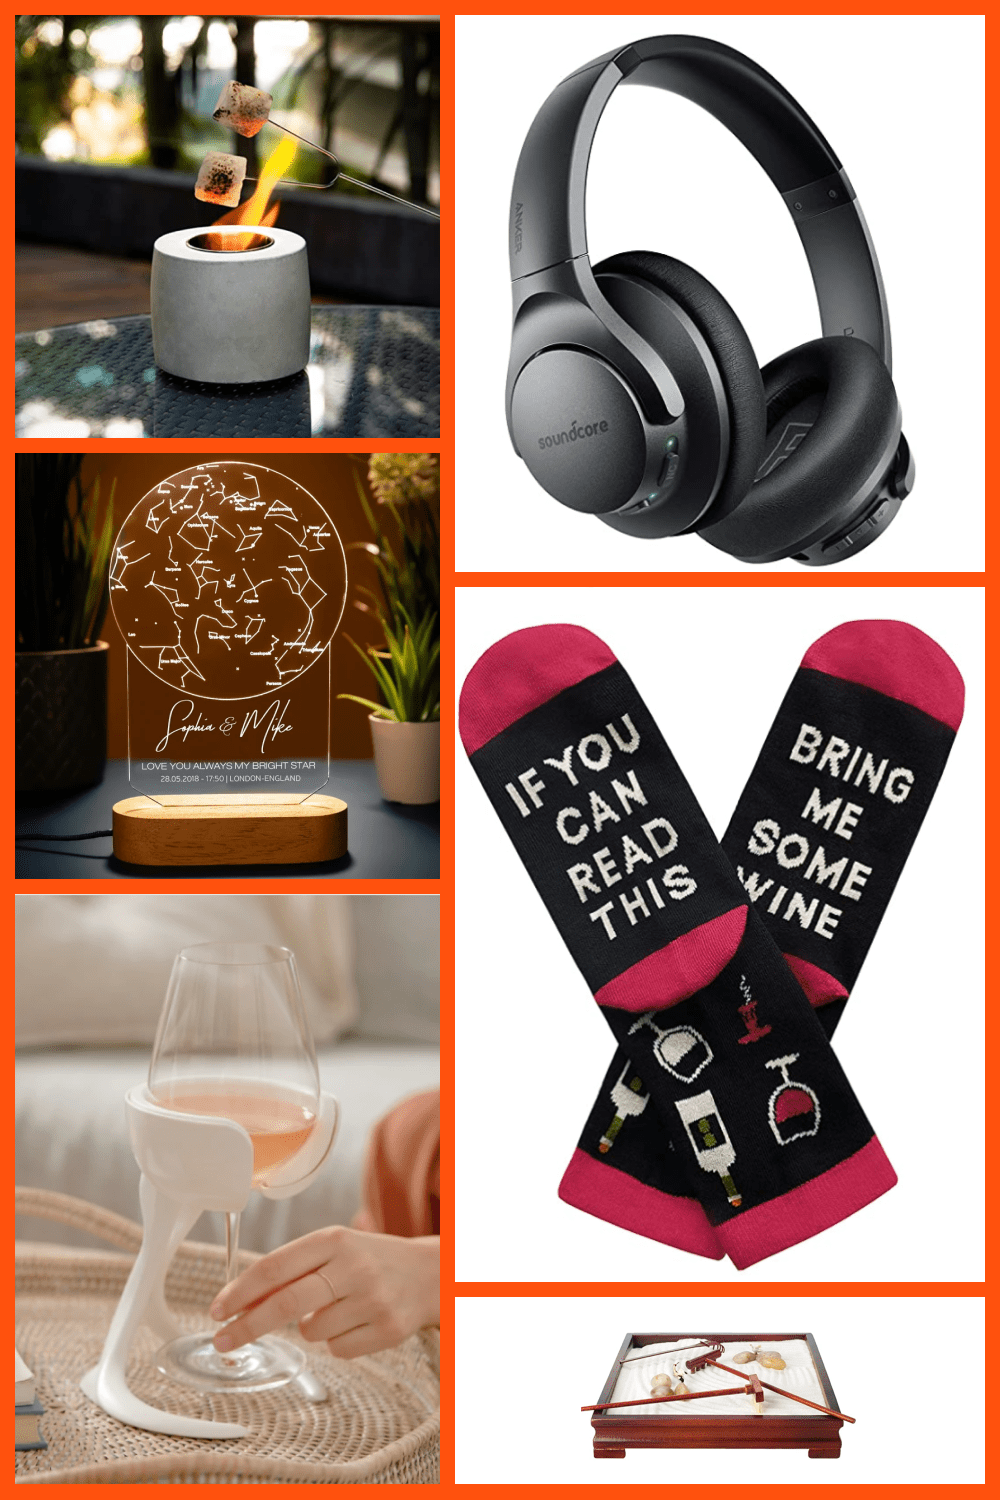 nerdy valentines gifts ideas for presents in 2022 pinterest